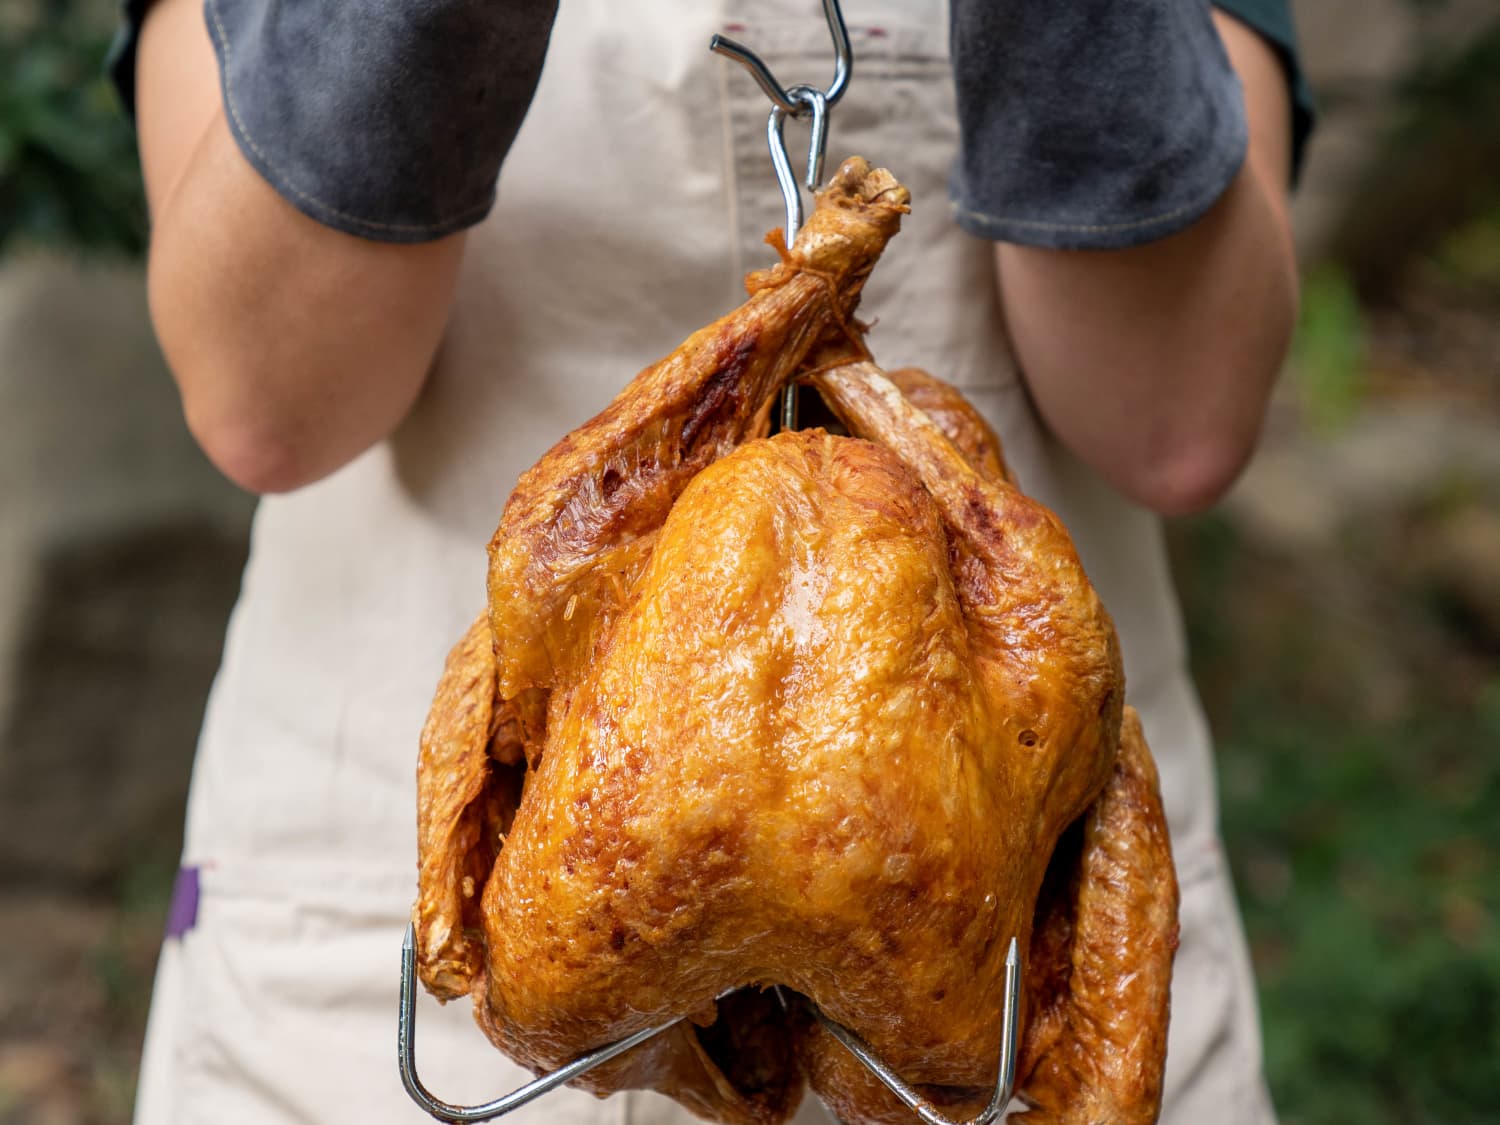 This gadget was built to help you cook turkey. Why do kitchen